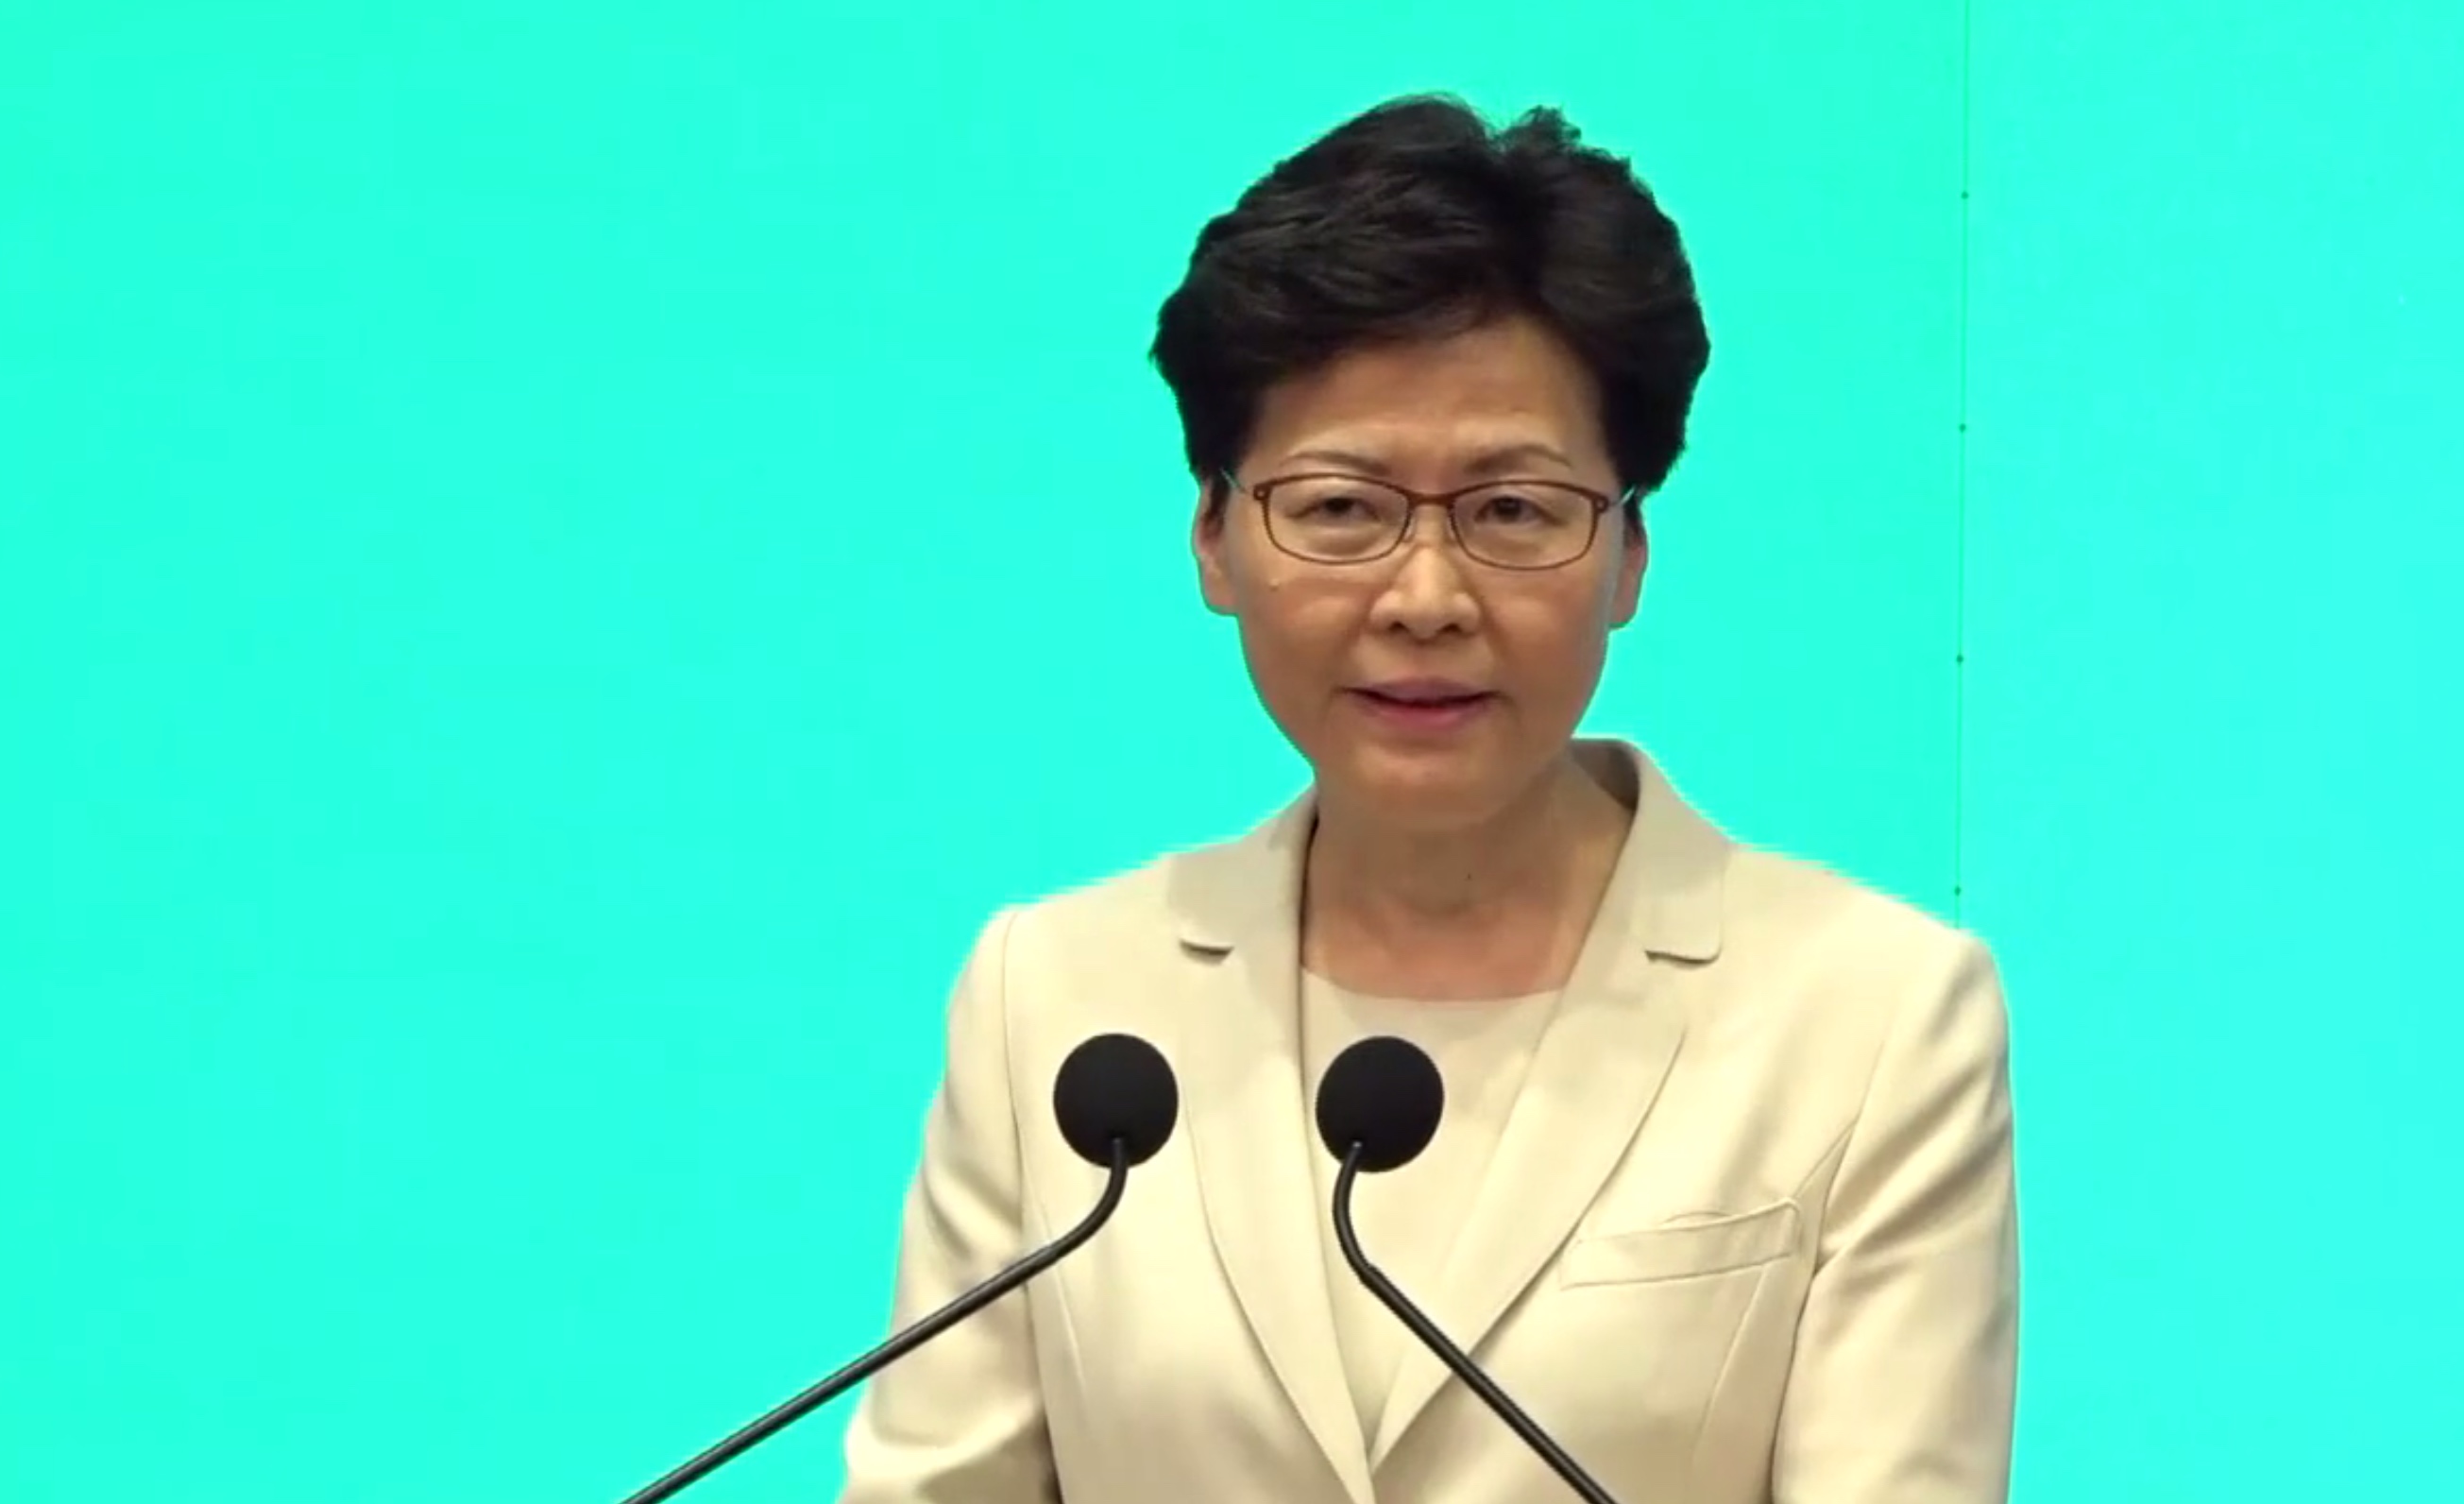 Hong Kong Chief Executive Carrie Lam speaks to the press this afternoon. Screengrab via Facebook.